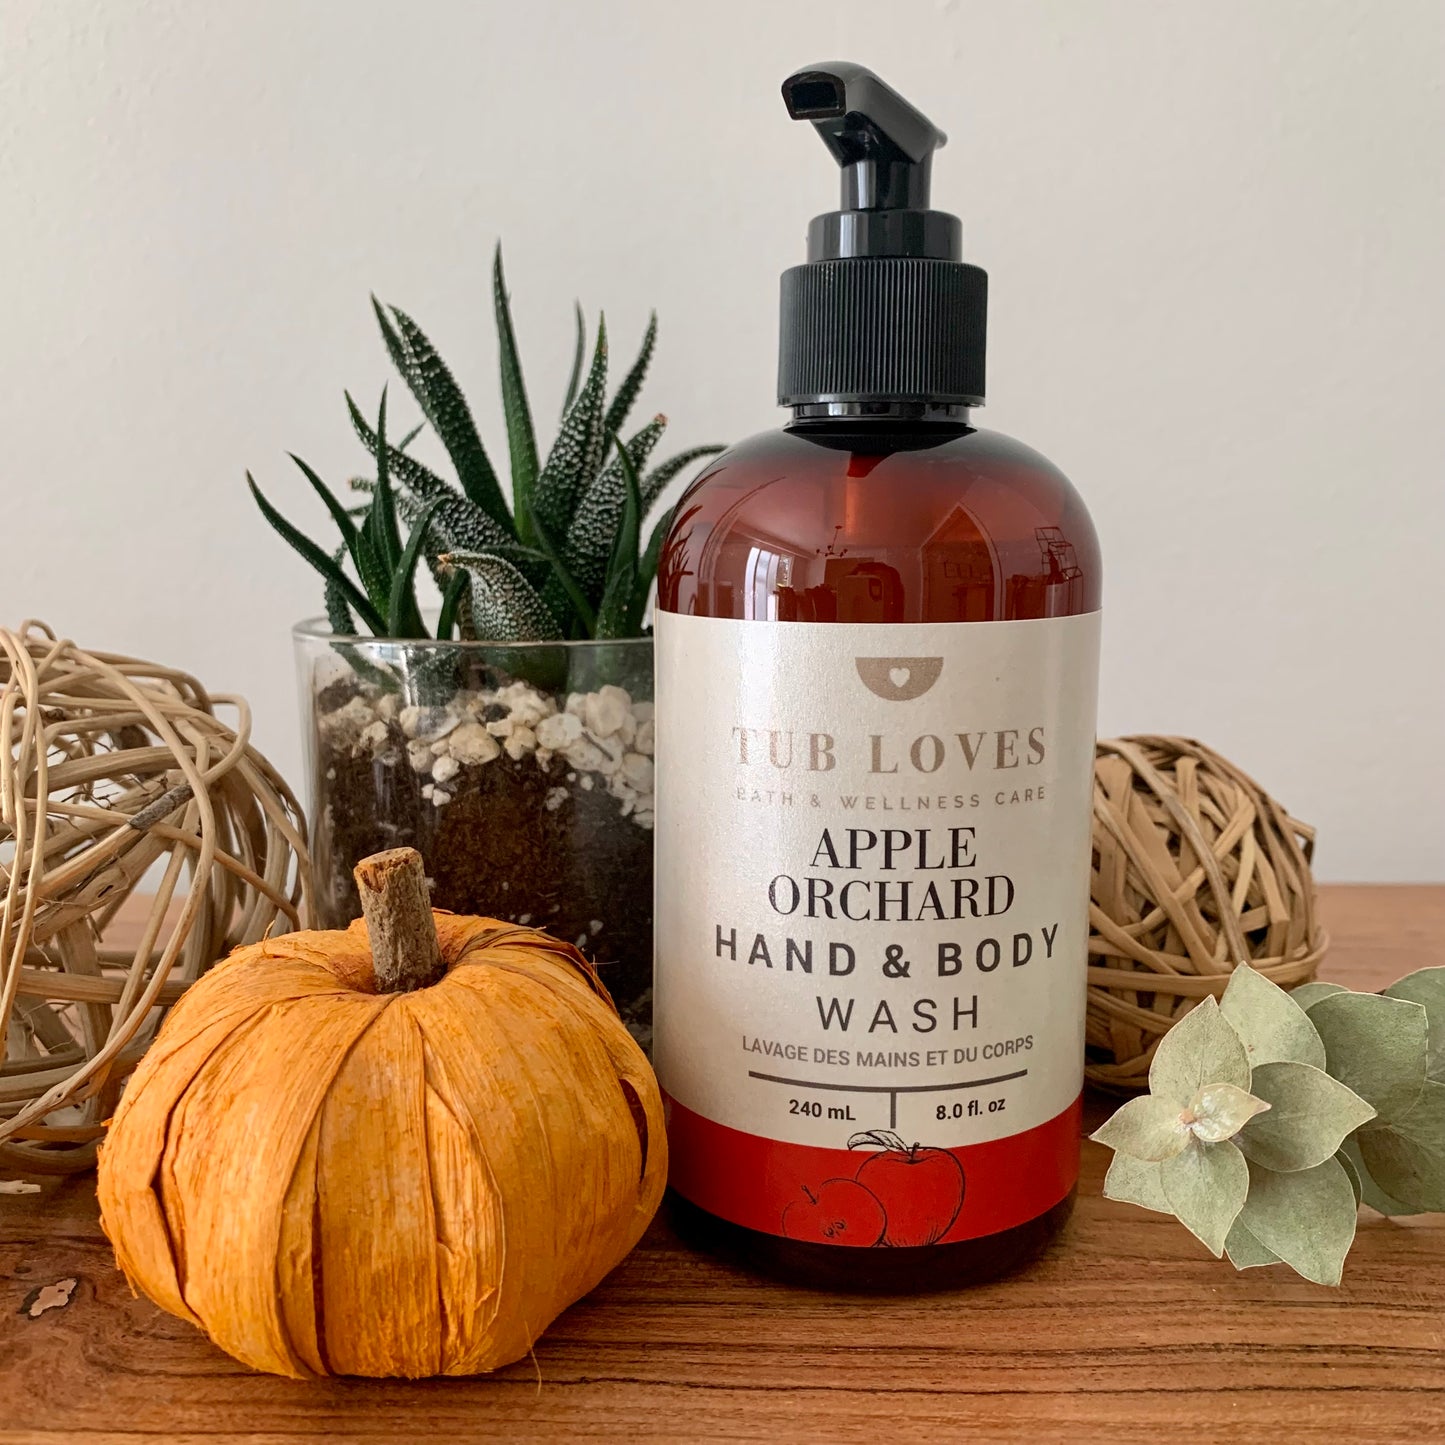 Apple Orchard - Hand and Body Wash - Tub Loves